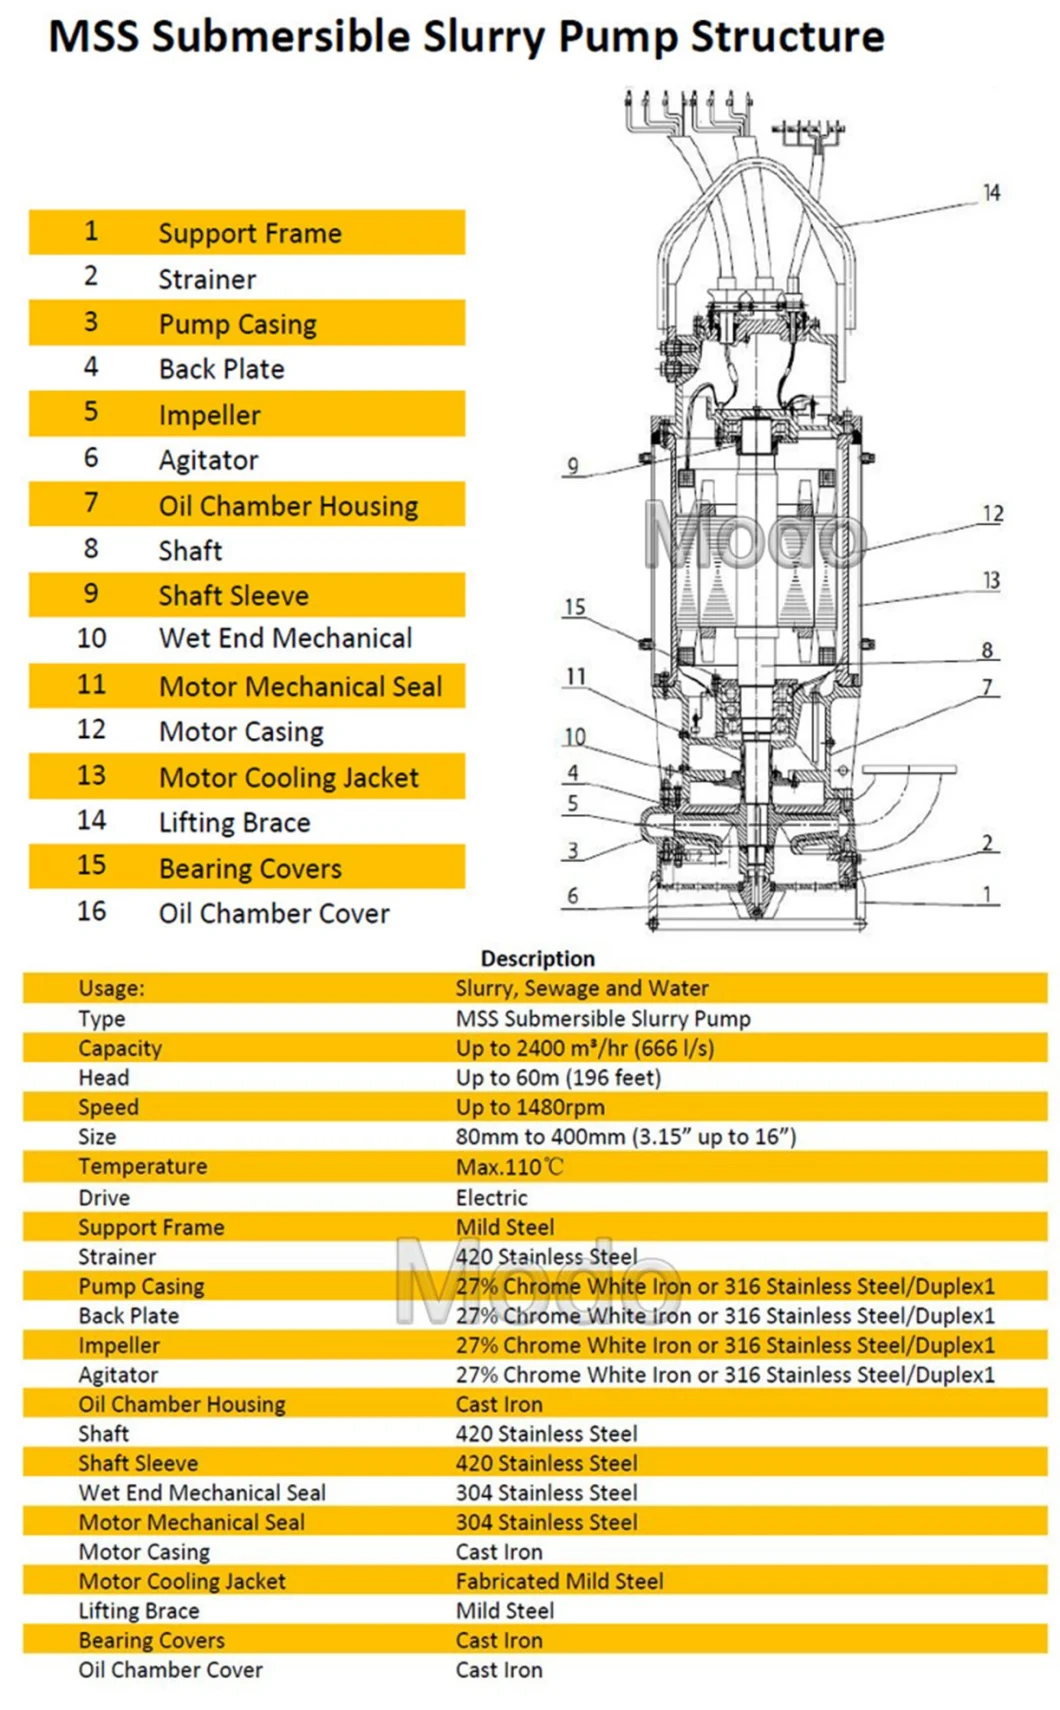 The Best Hydraulic Electric Driven Huge Heavy Duty Submersible Slurry Pump for Mining